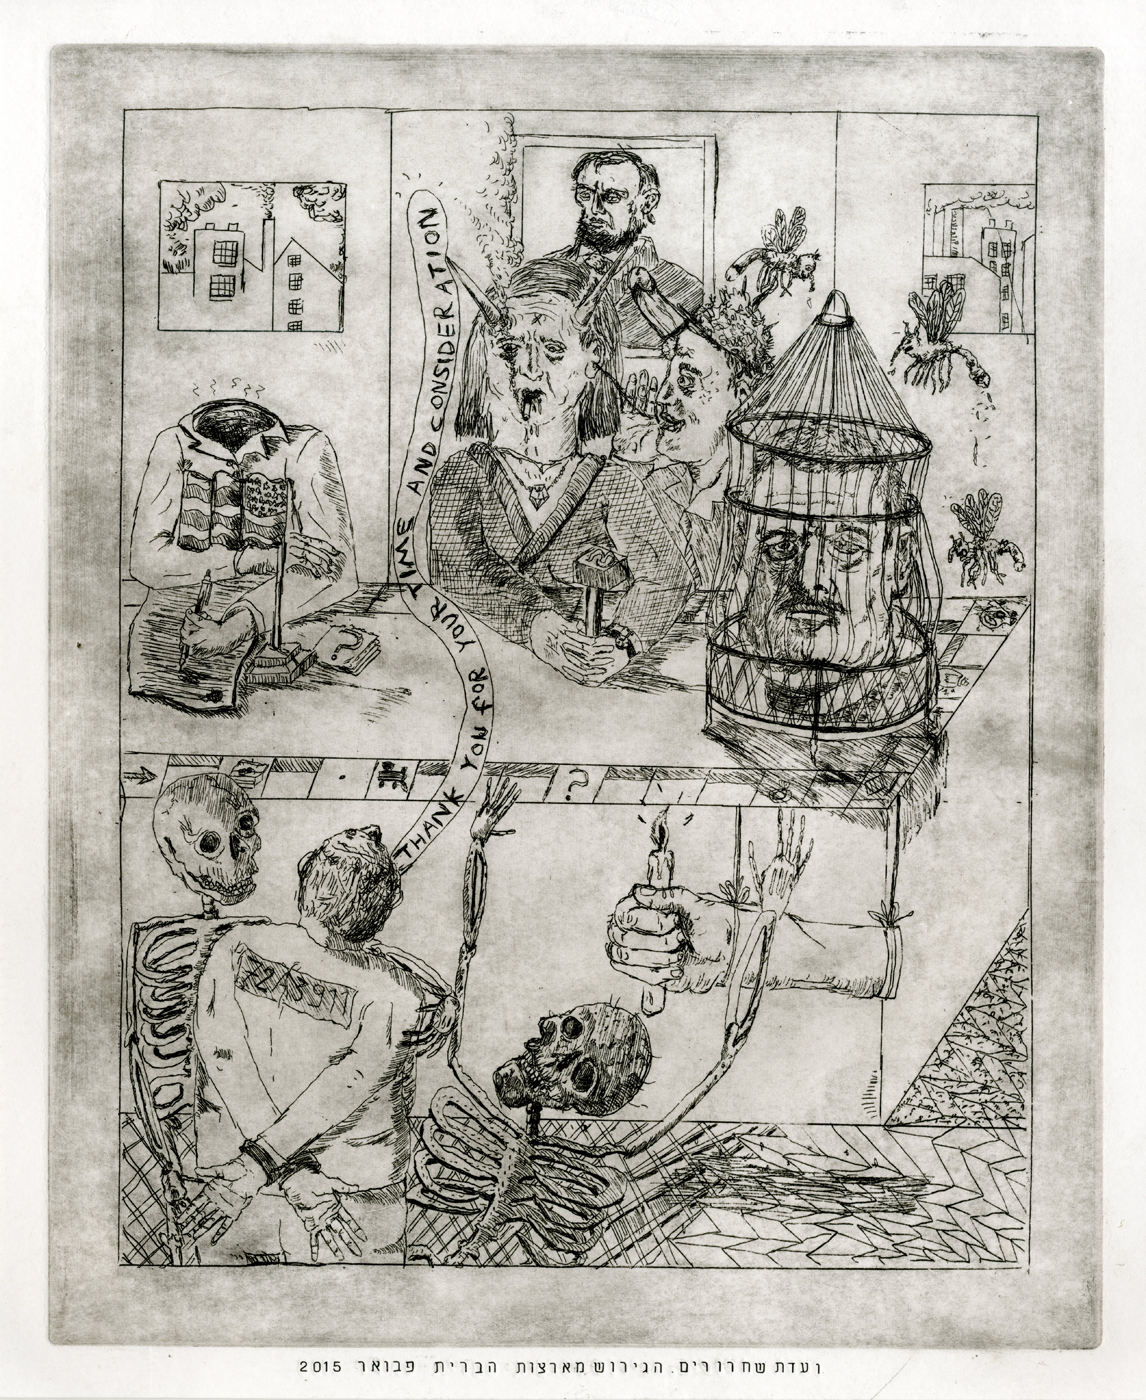 Parole Committee. The Expulsion From the USA,etching, 20X25 cm, 2015